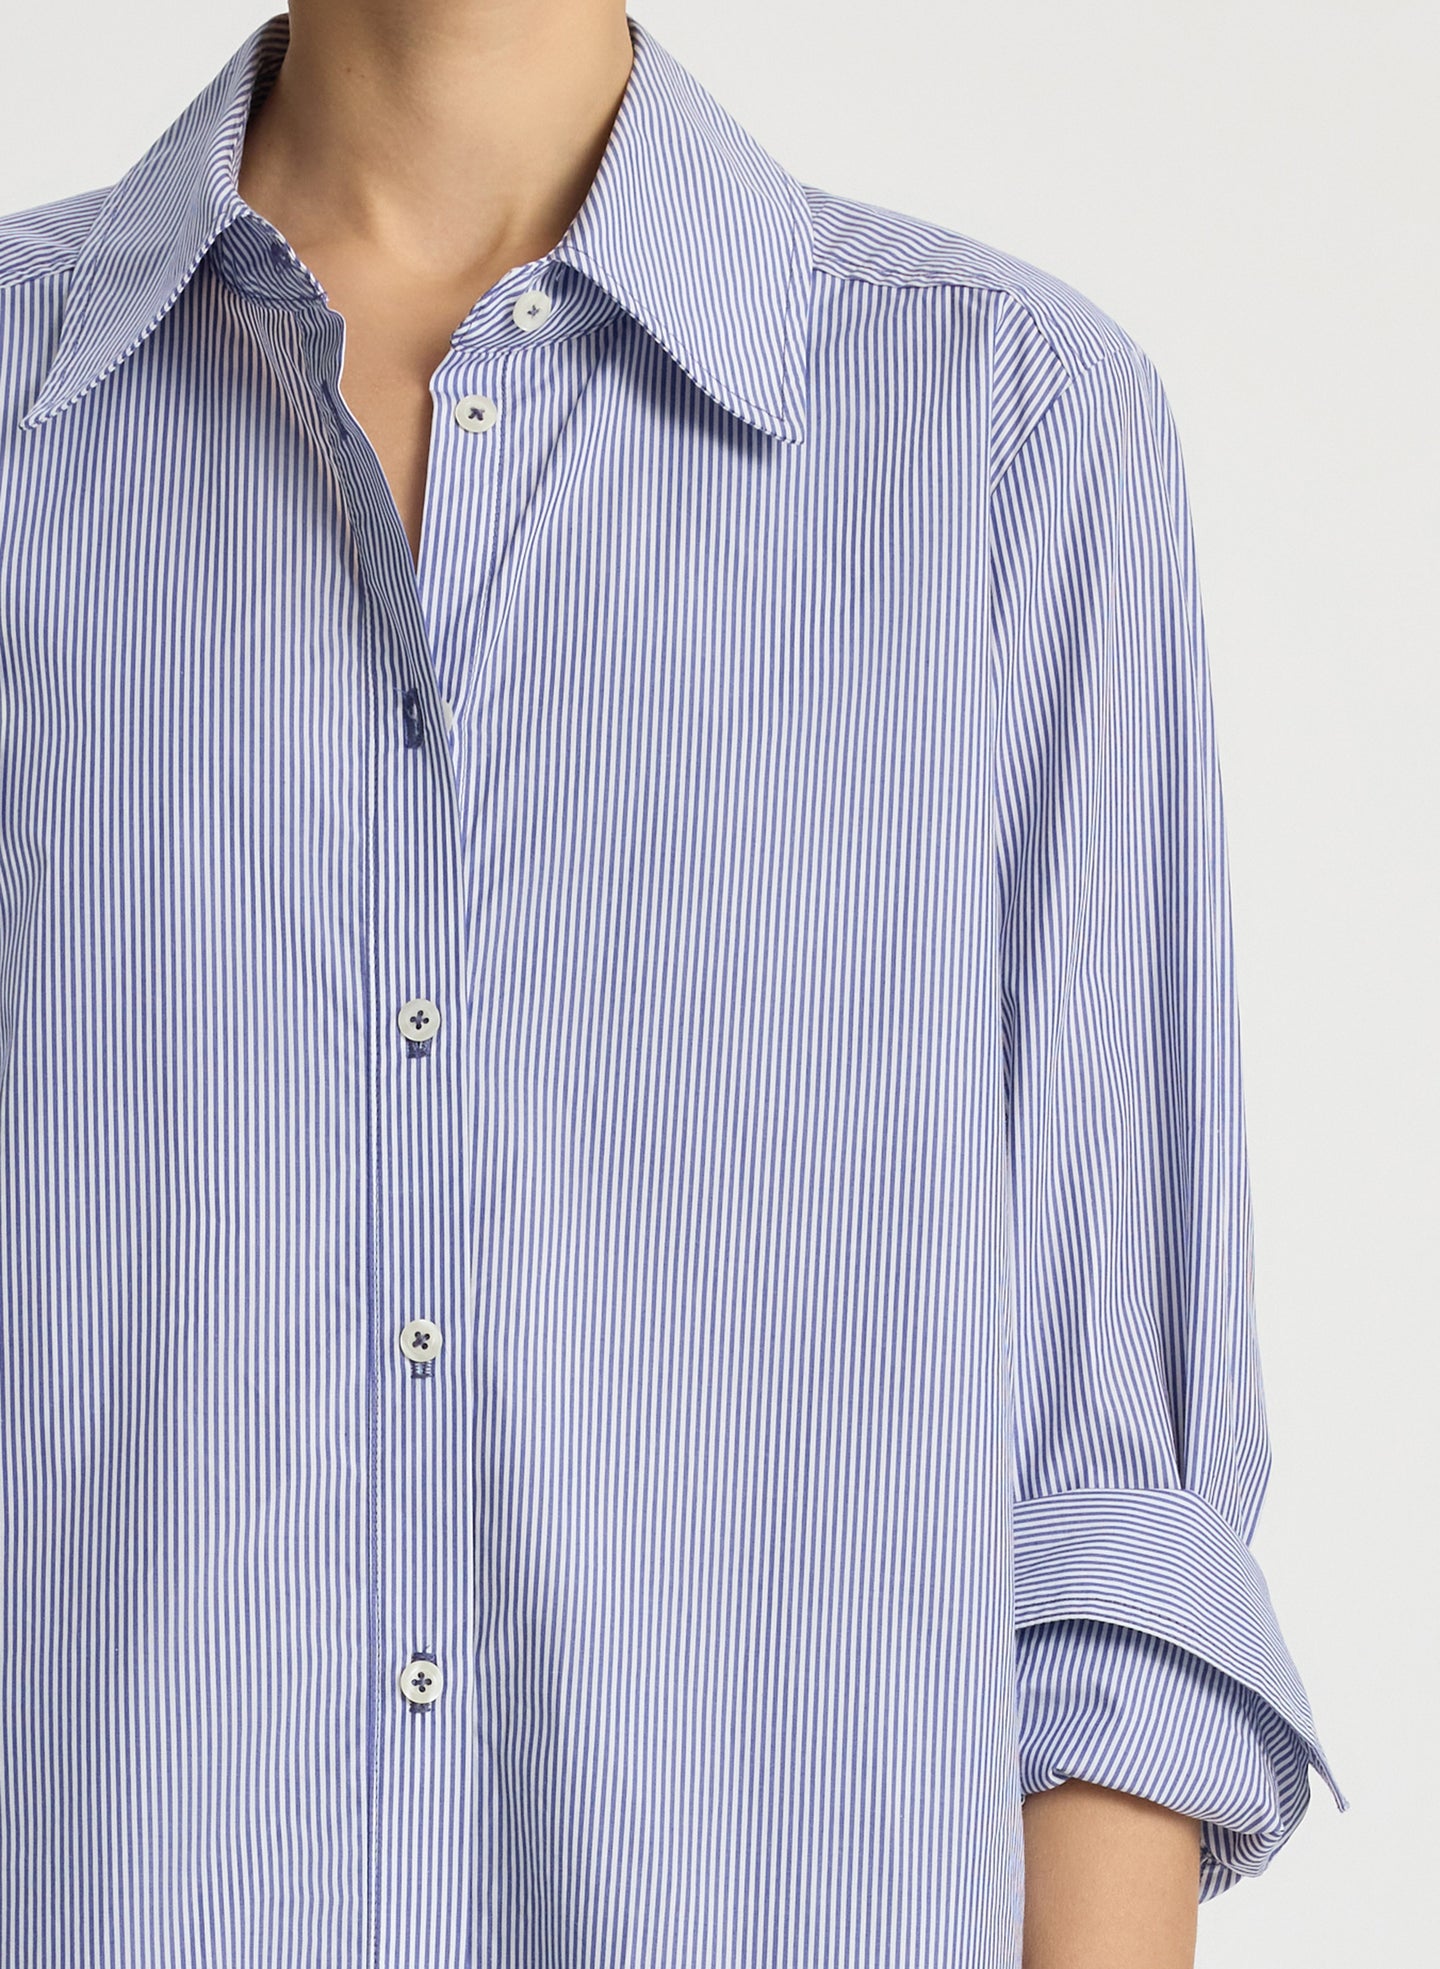 detail view of woman wearing blue striped button down collared shirt and navy blue pants